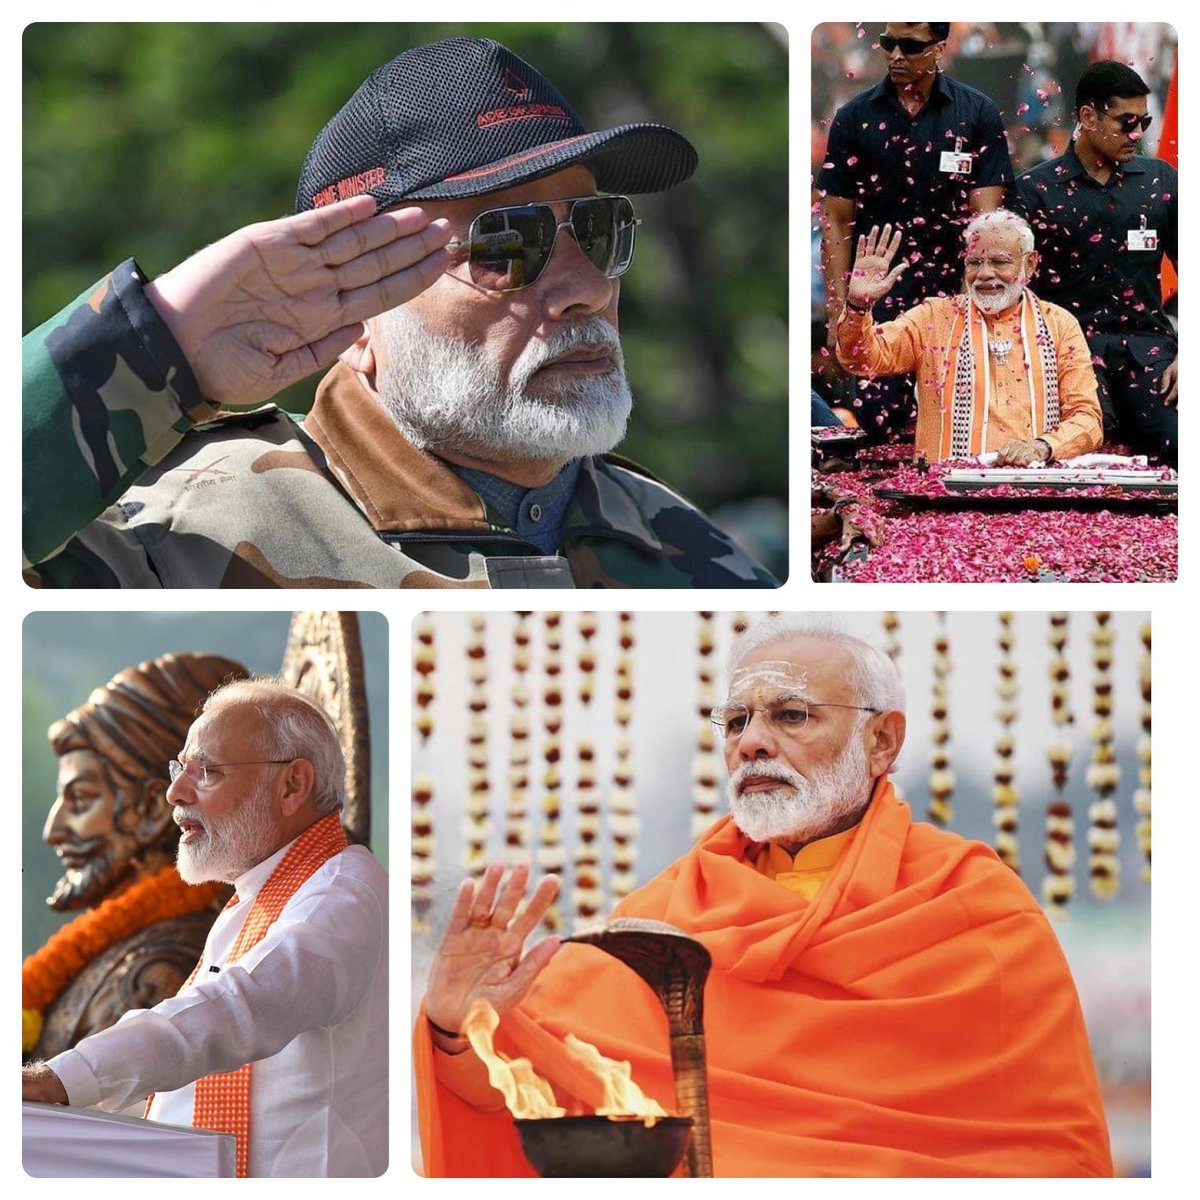 Happy Birthday to the World's highest aprroved and rated PM,to one of the most influential person right now,to a pracharak and swayamsevak of Sangh Solved many issues of national intrest, will be remembered for centuries for his bold decisions #HappyBdayModiji @narendramodi